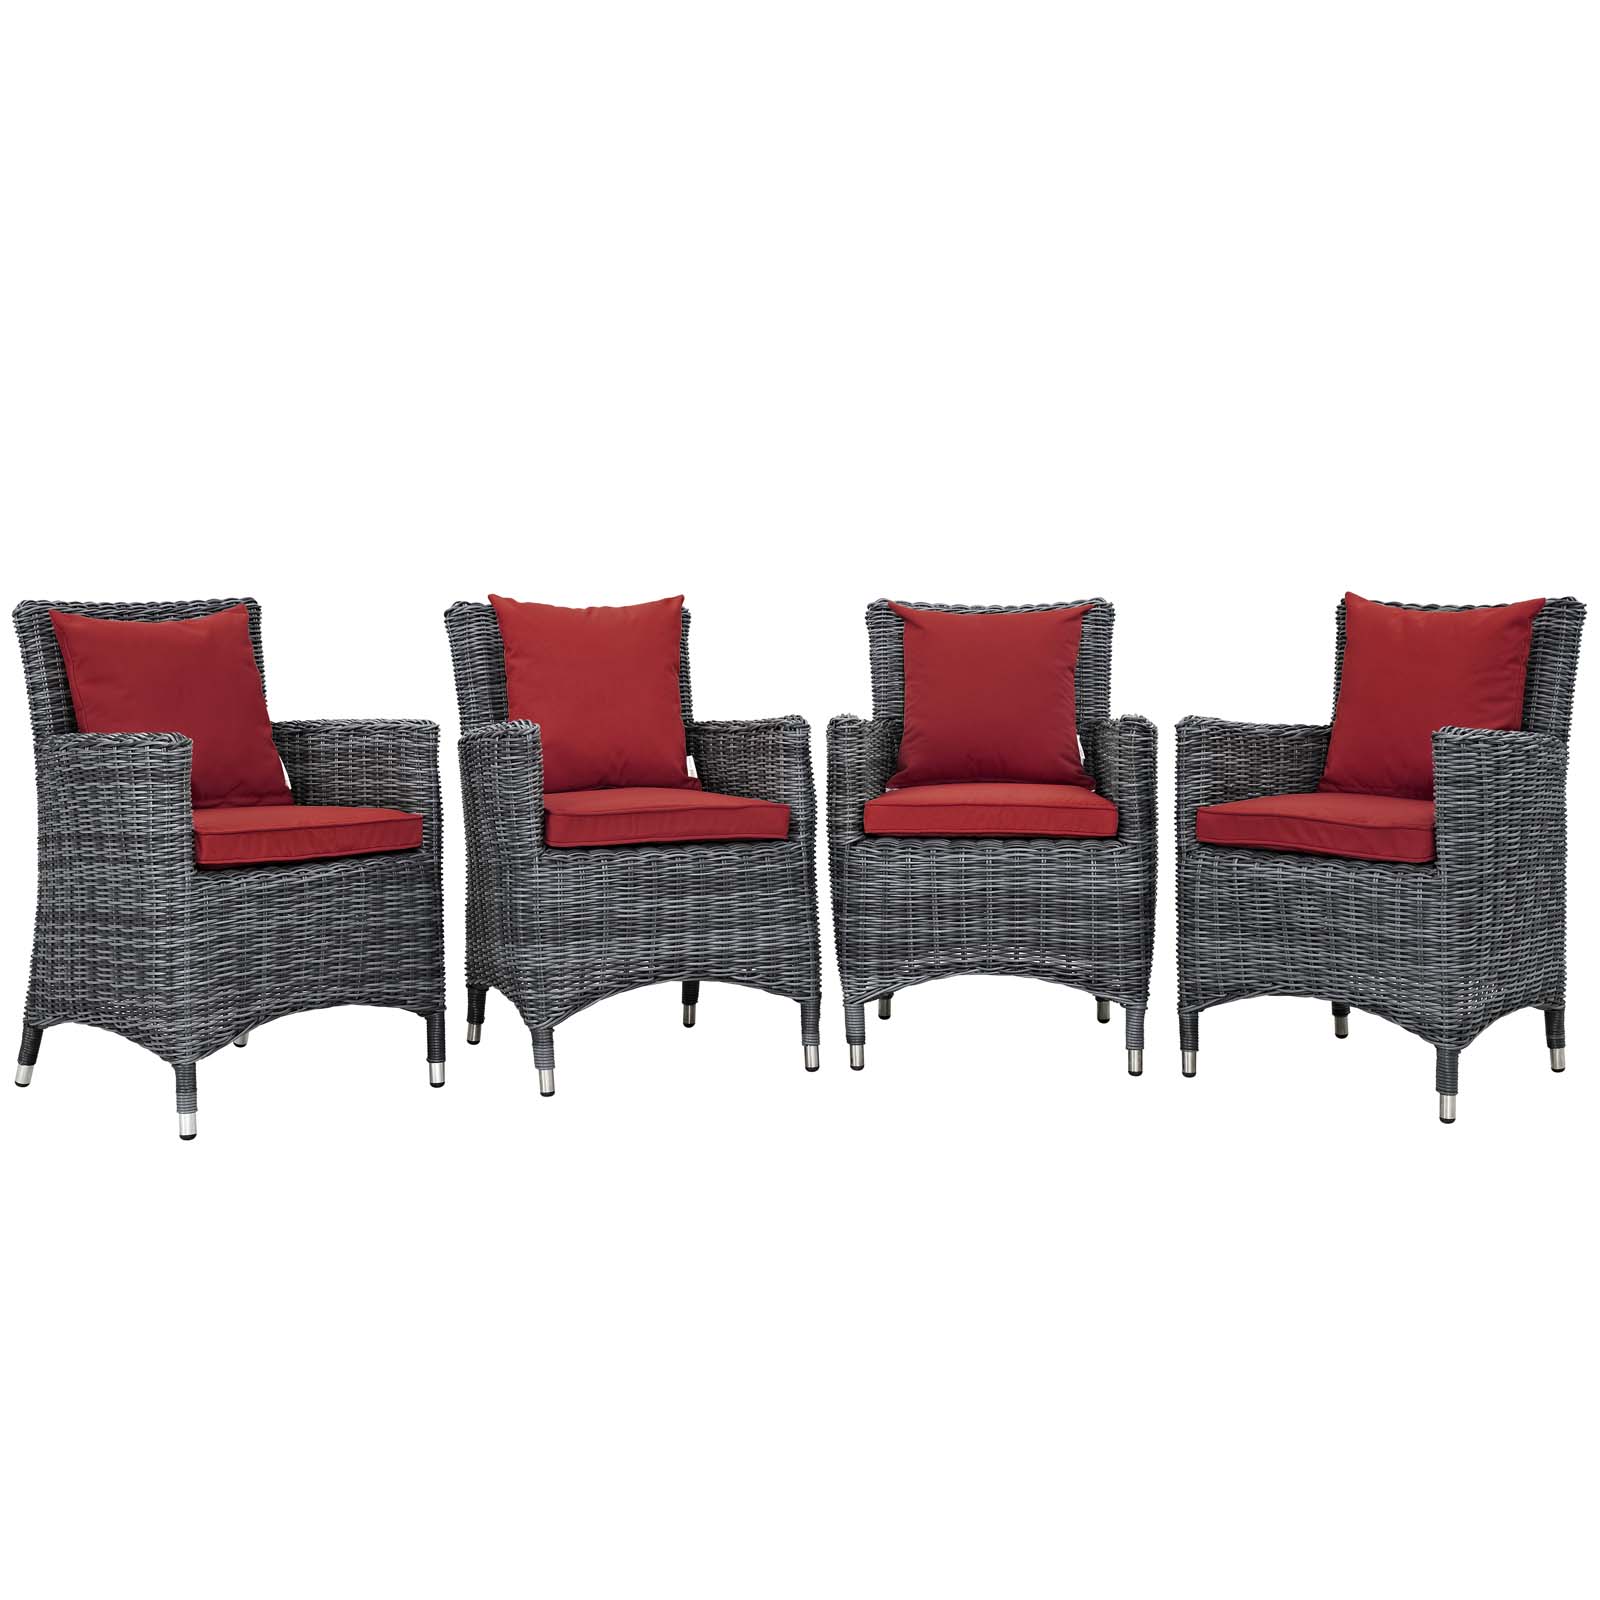 Modway Summon 4 Piece Outdoor Patio Sunbrella® Dining Set in Canvas Red - image 1 of 5